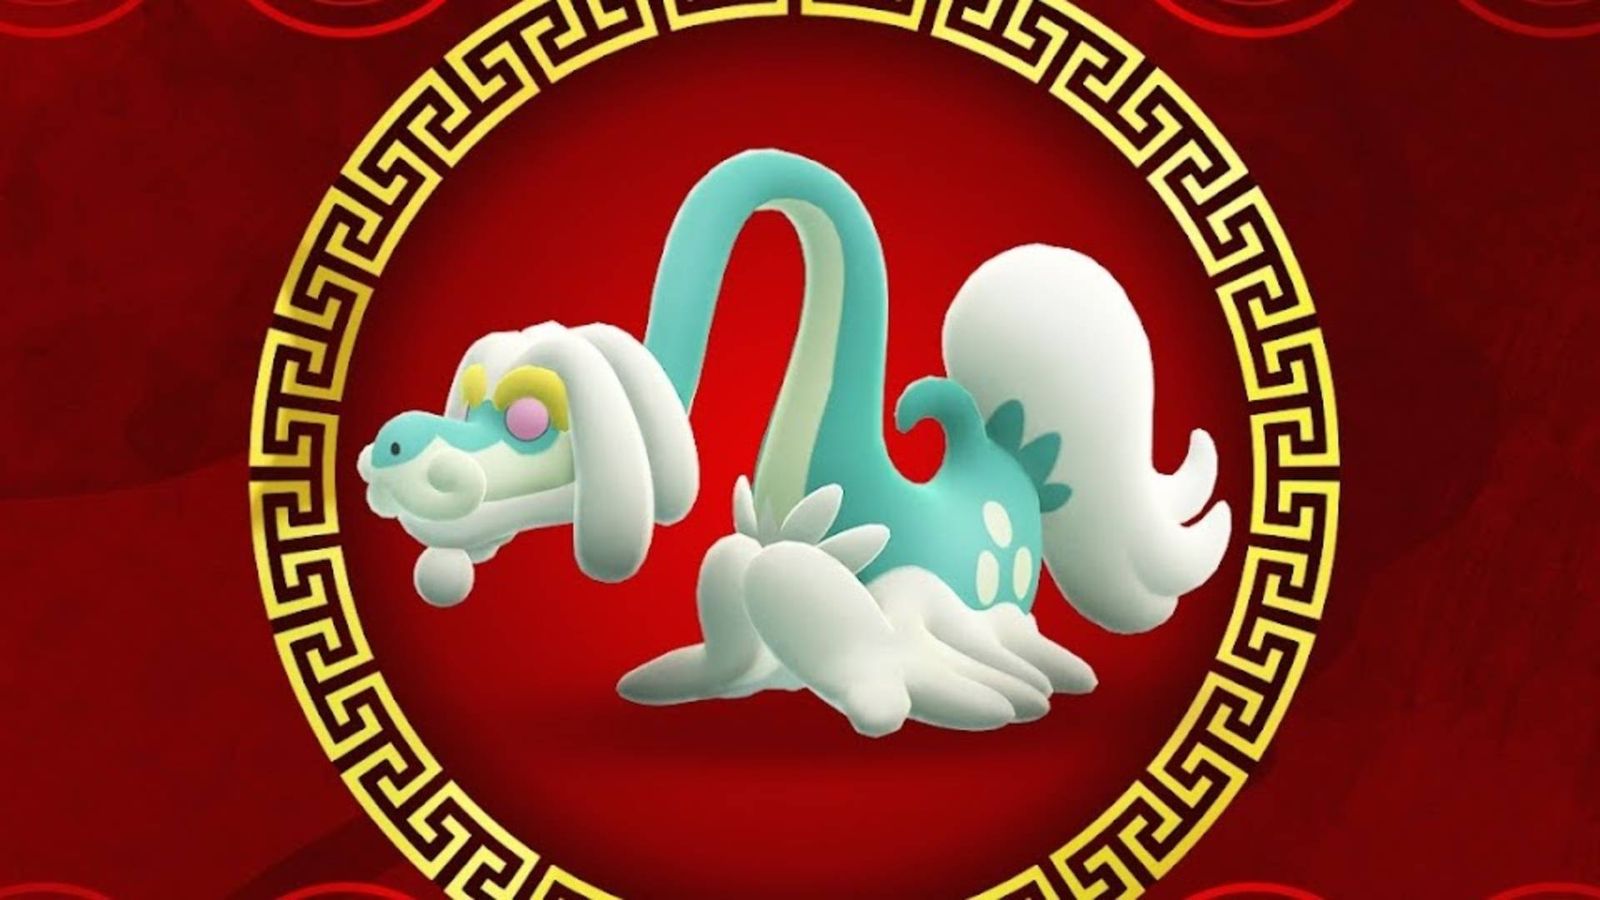 Drampa is laying down in a circle on a red background for Pokémon GO